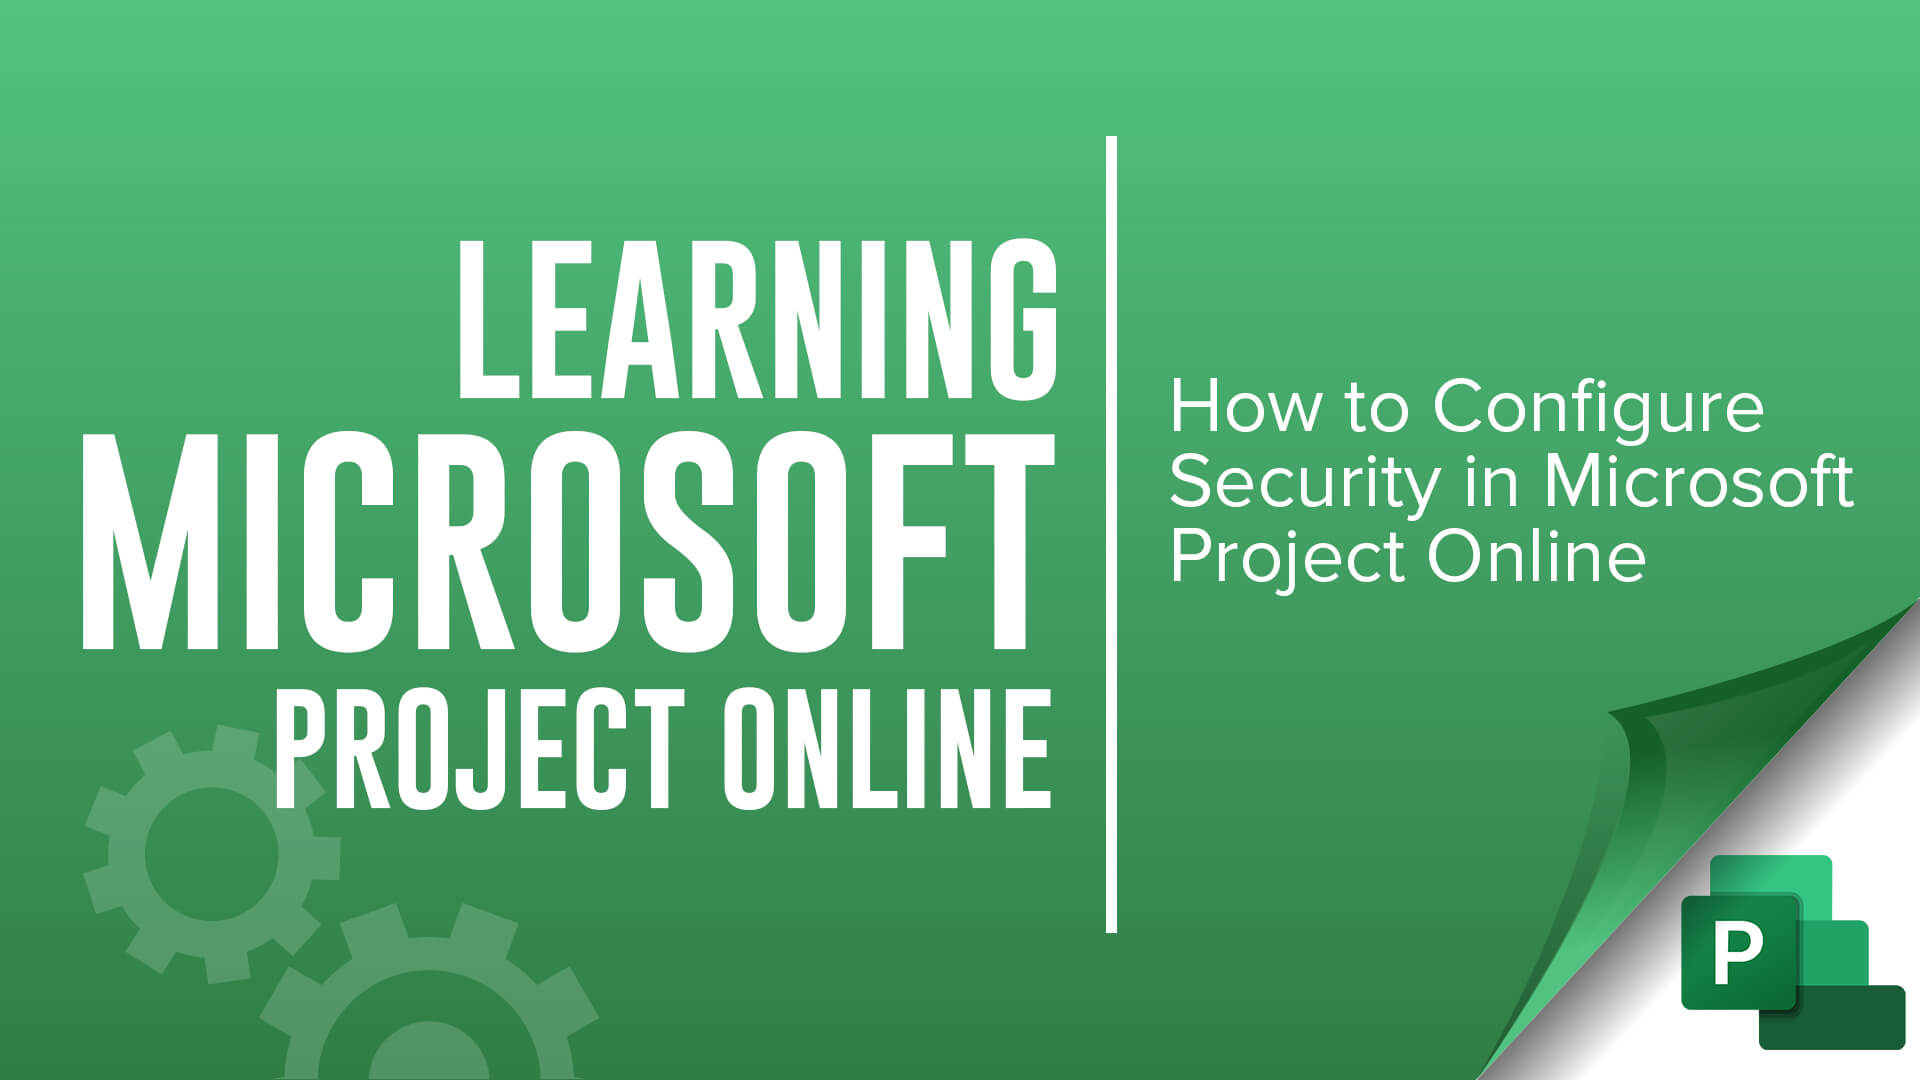 learning Microsoft Project Online - how to configure security in Microsoft Project Online